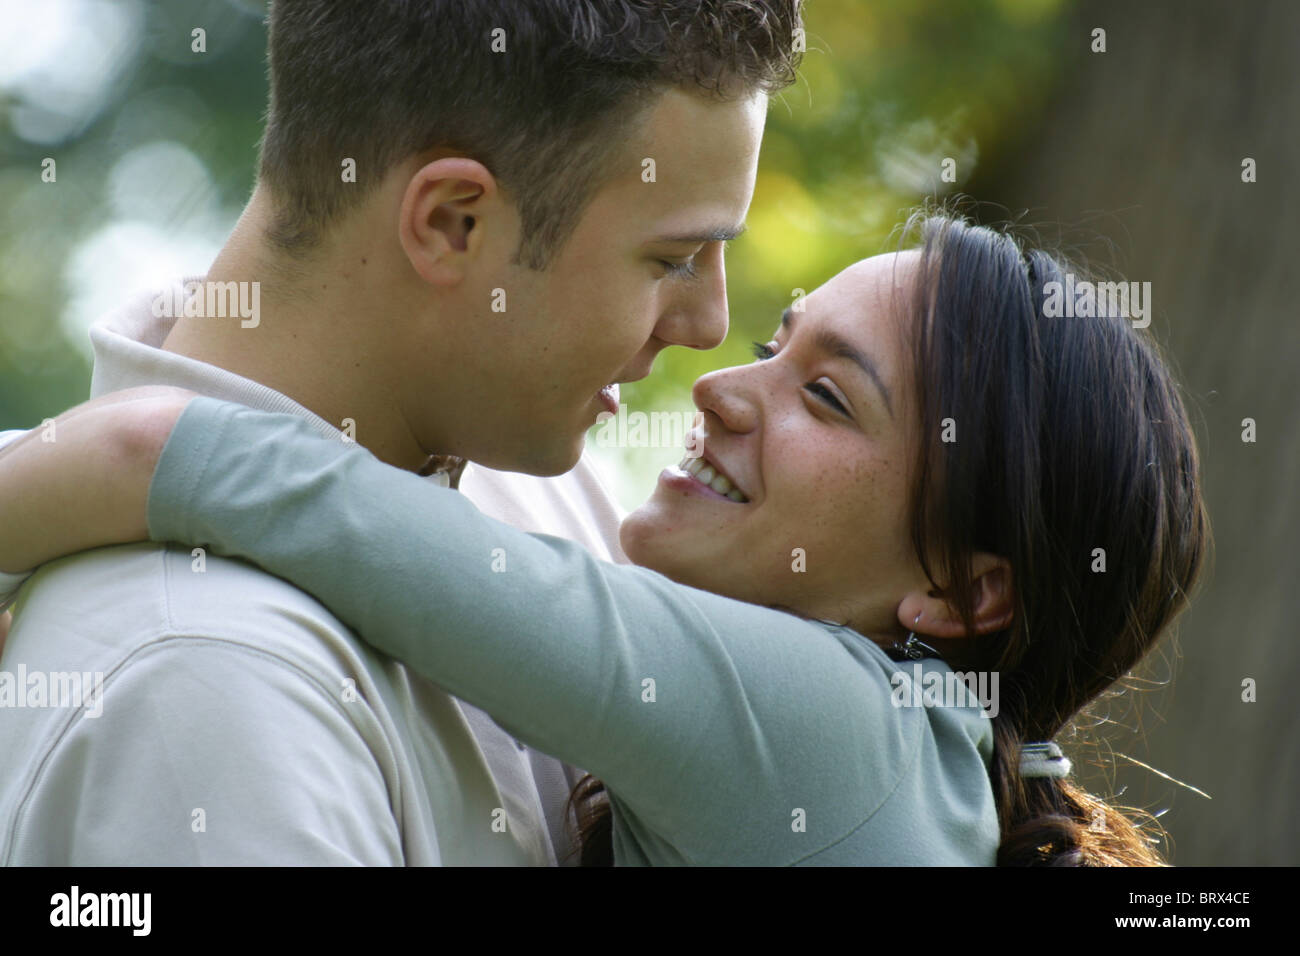 Teenage romance,young asian girl embracing her boyfriend outside and smile. Stock Photo